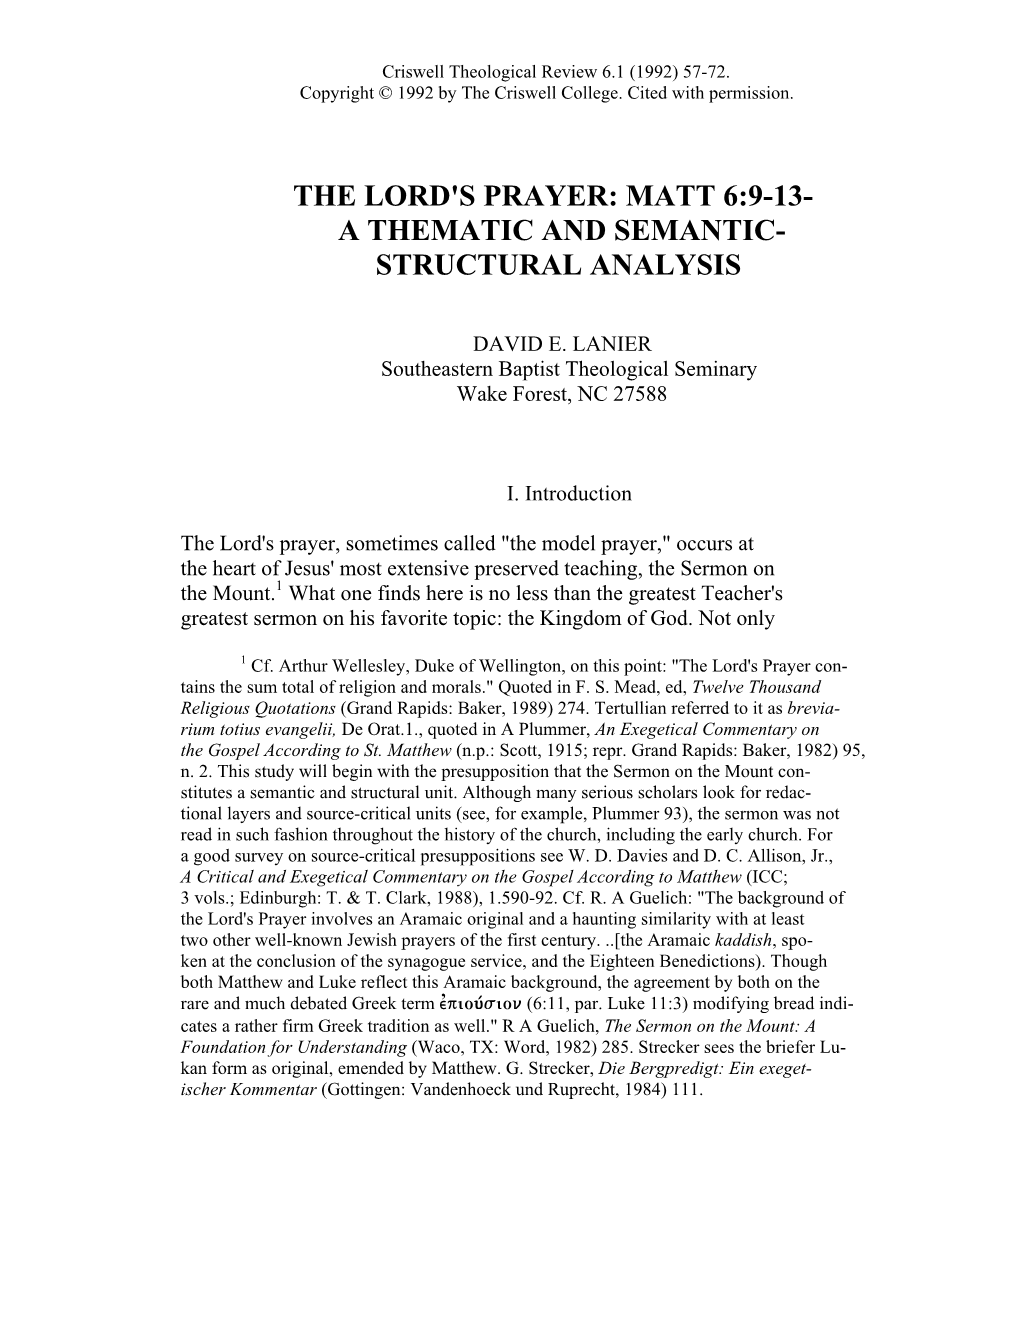 The Lord's Prayer: Matt 6:9-13- a Thematic and Semantic- Structural Analysis